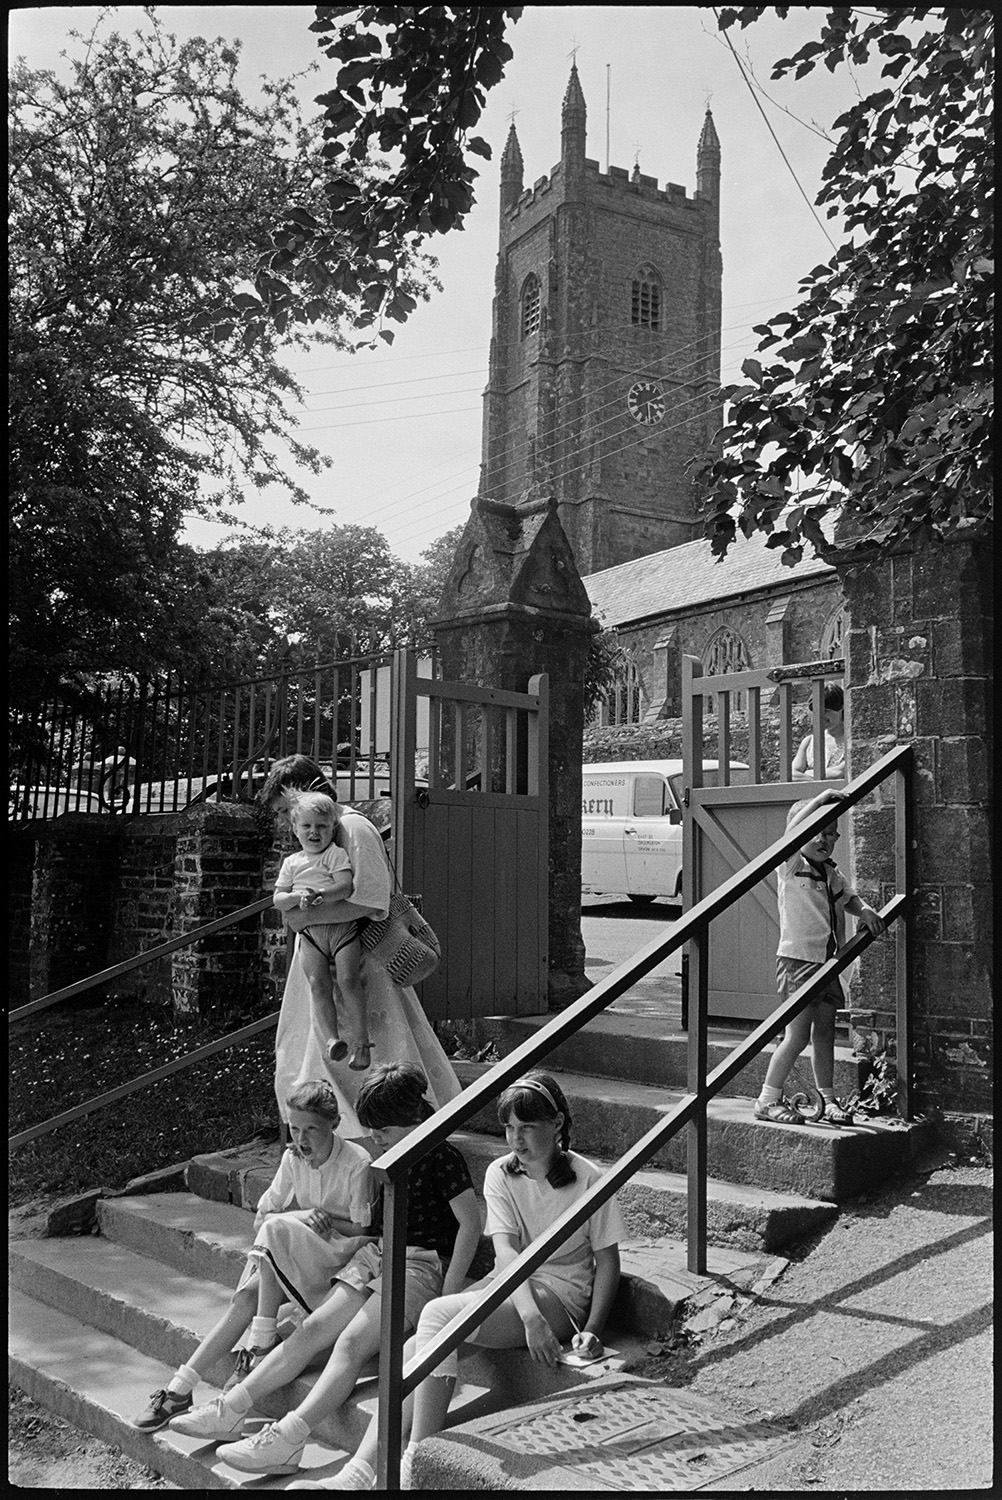 Children playing rounders in park. Returning through village.
[A mother carrying a young child, a boy playing by the hand rail and children sitting on the steps by the gate at Chulmleigh Primary School. Chulmleigh Church tower can be seen in the background.]